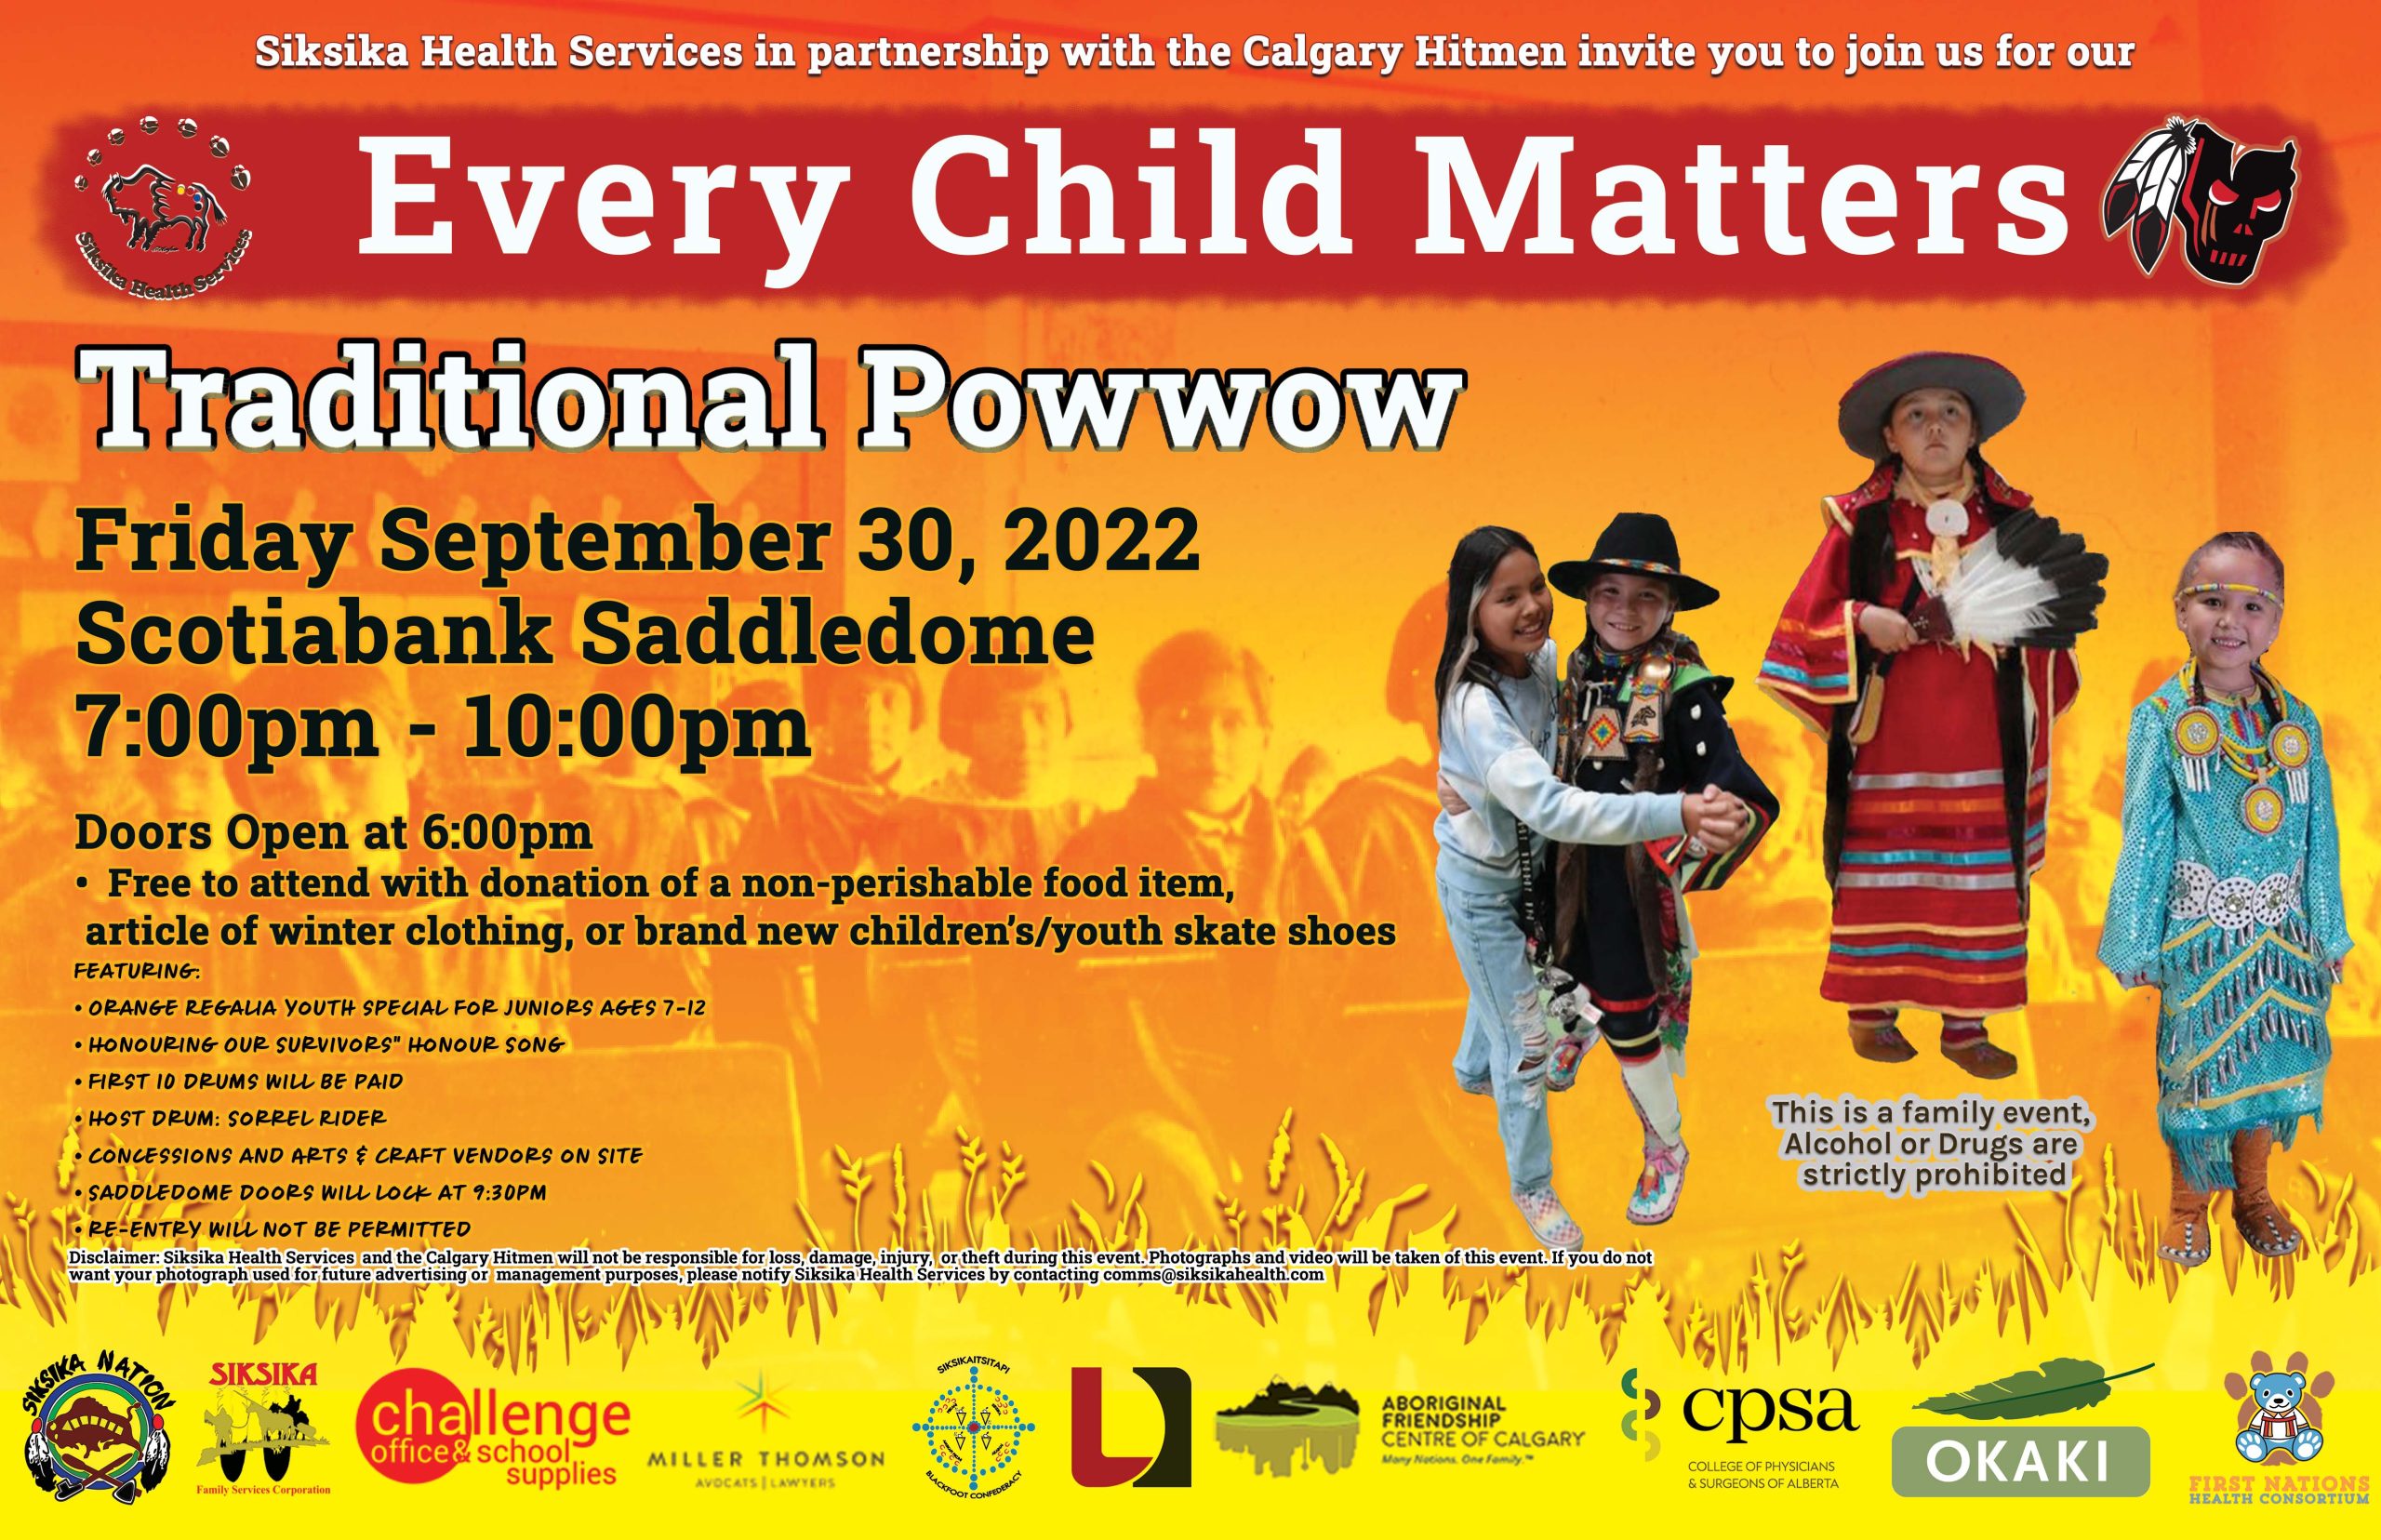 FOR IMMEDIATE RELEASE: Every Child Matters Traditional Powwow at Scotiabank  Saddledome - Siksika Health ServicesSiksika Health Services